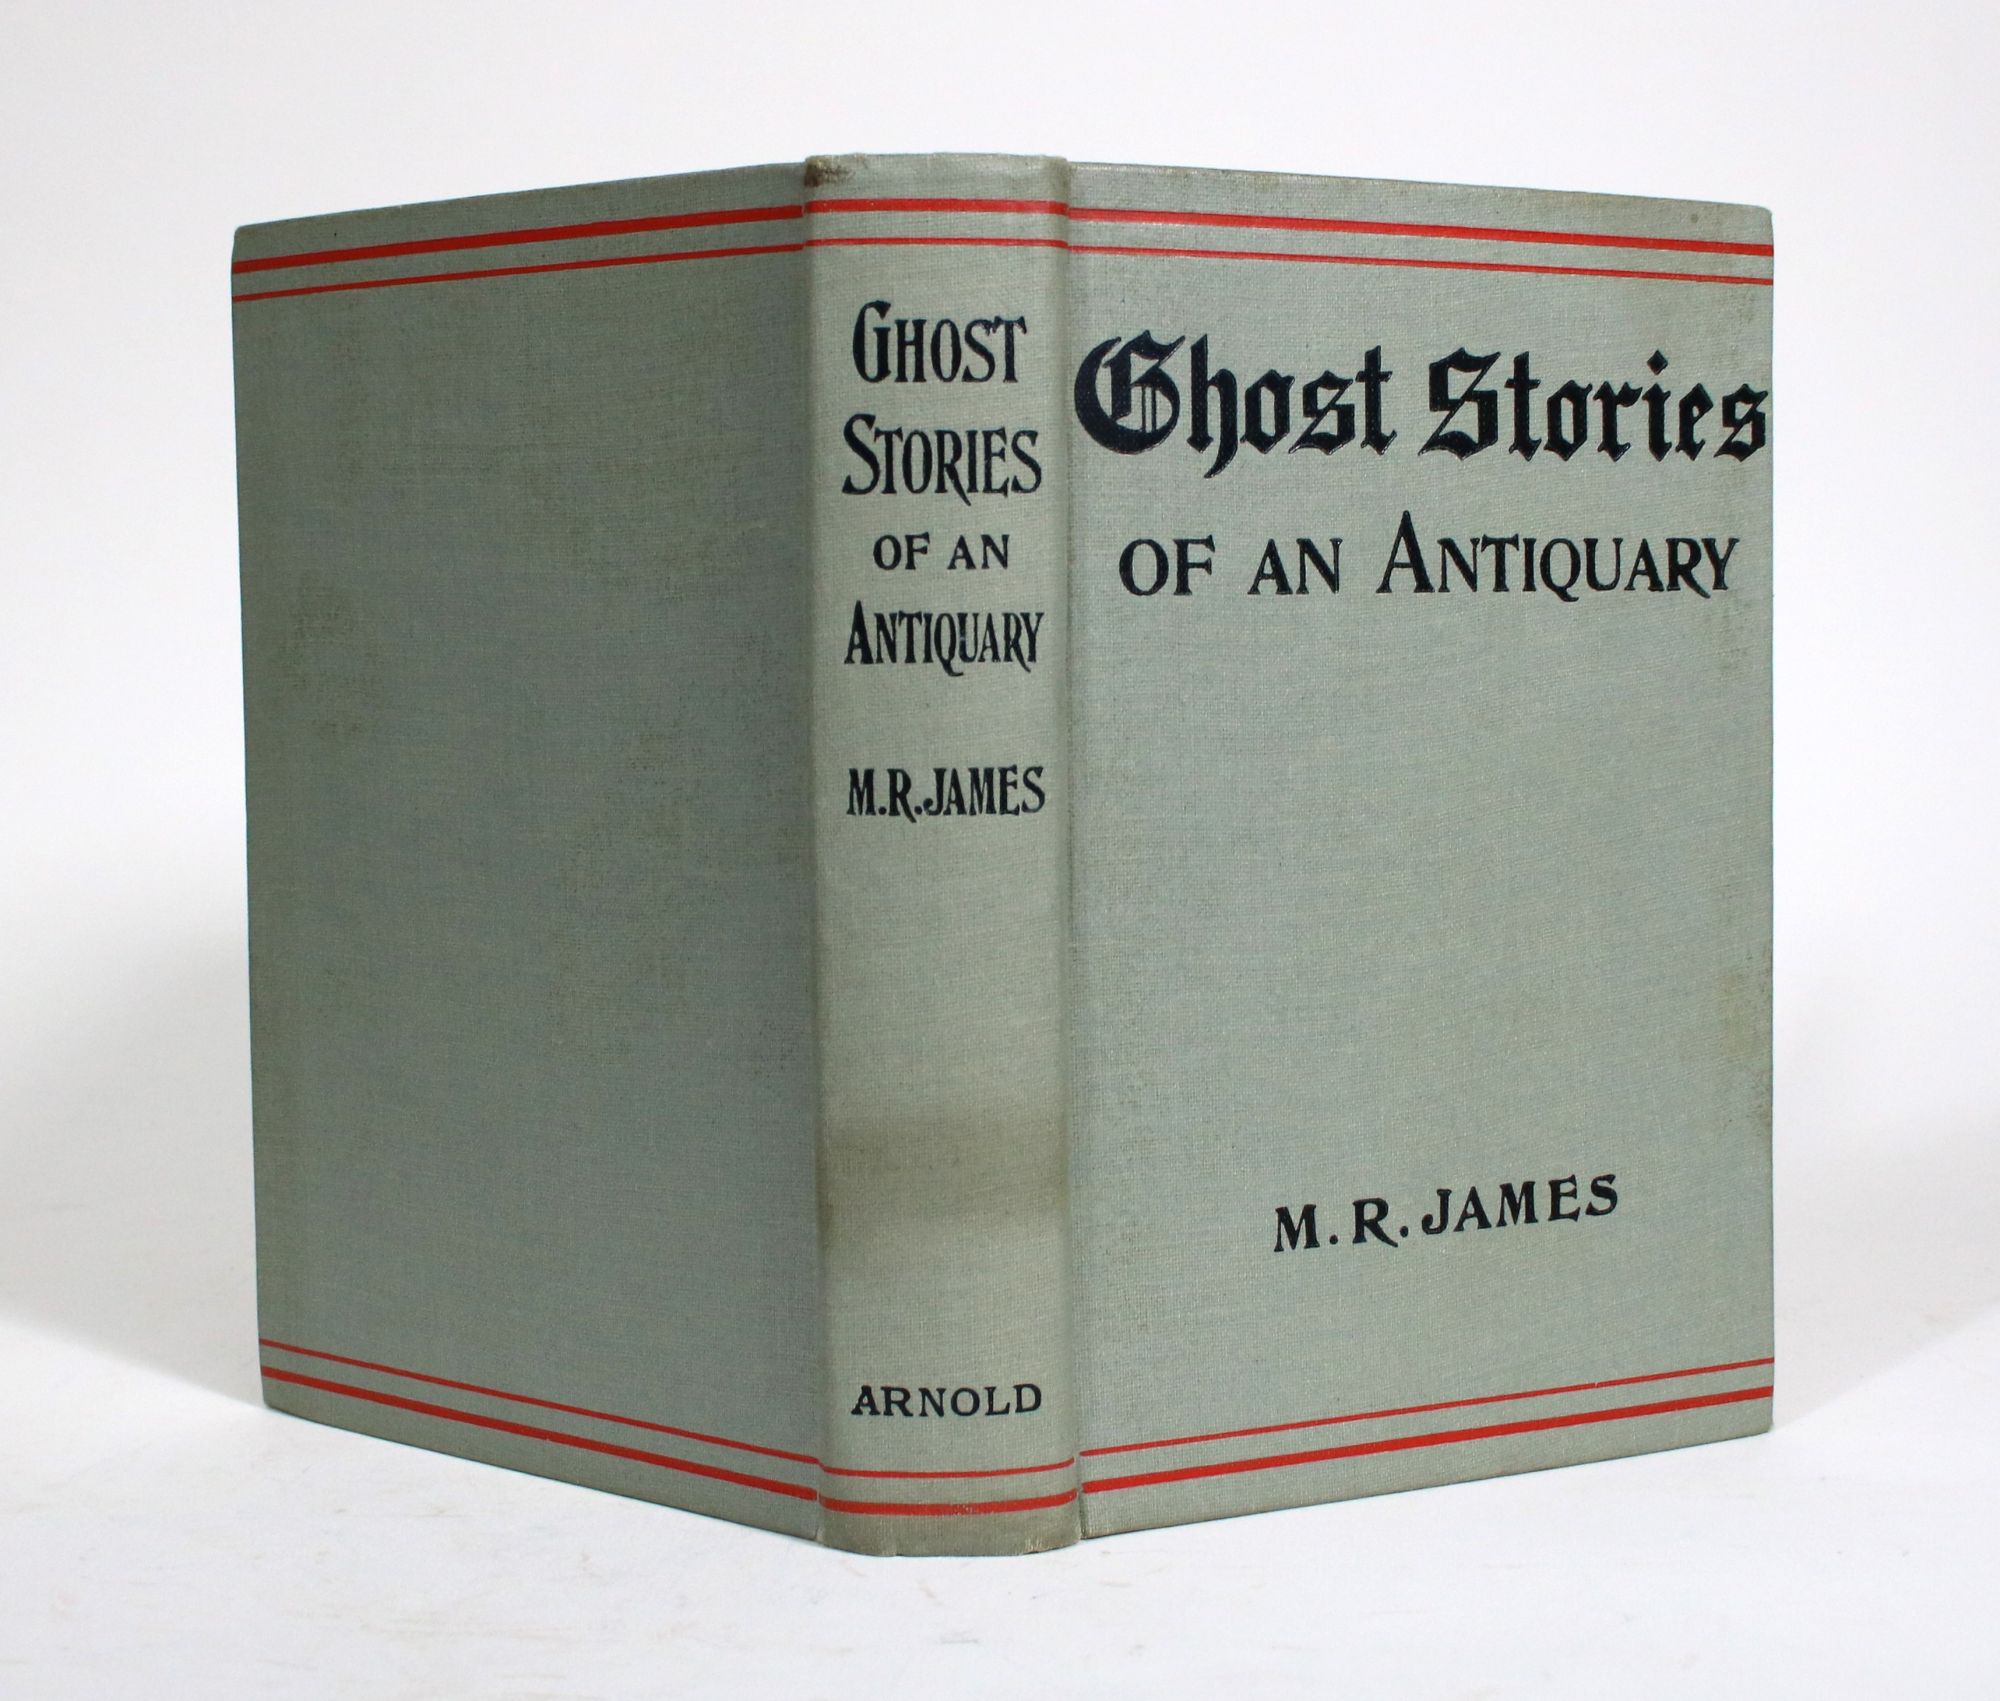 Ghost Stories of an Antiquary - James, Montague Rhodes